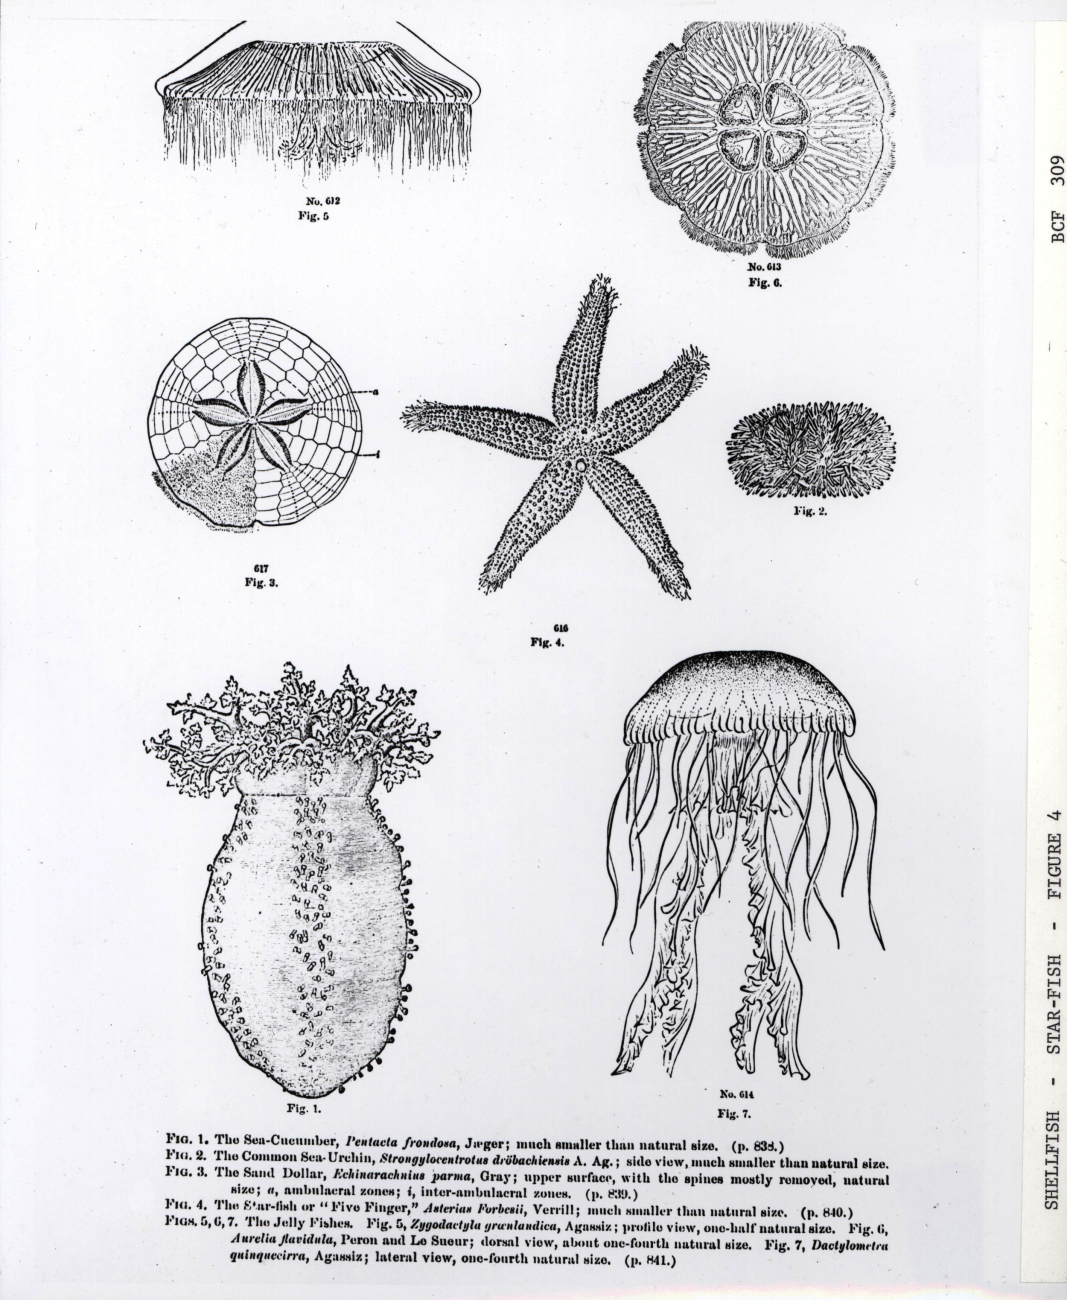 Line drawings of a variety of echinoderms and coelenterates